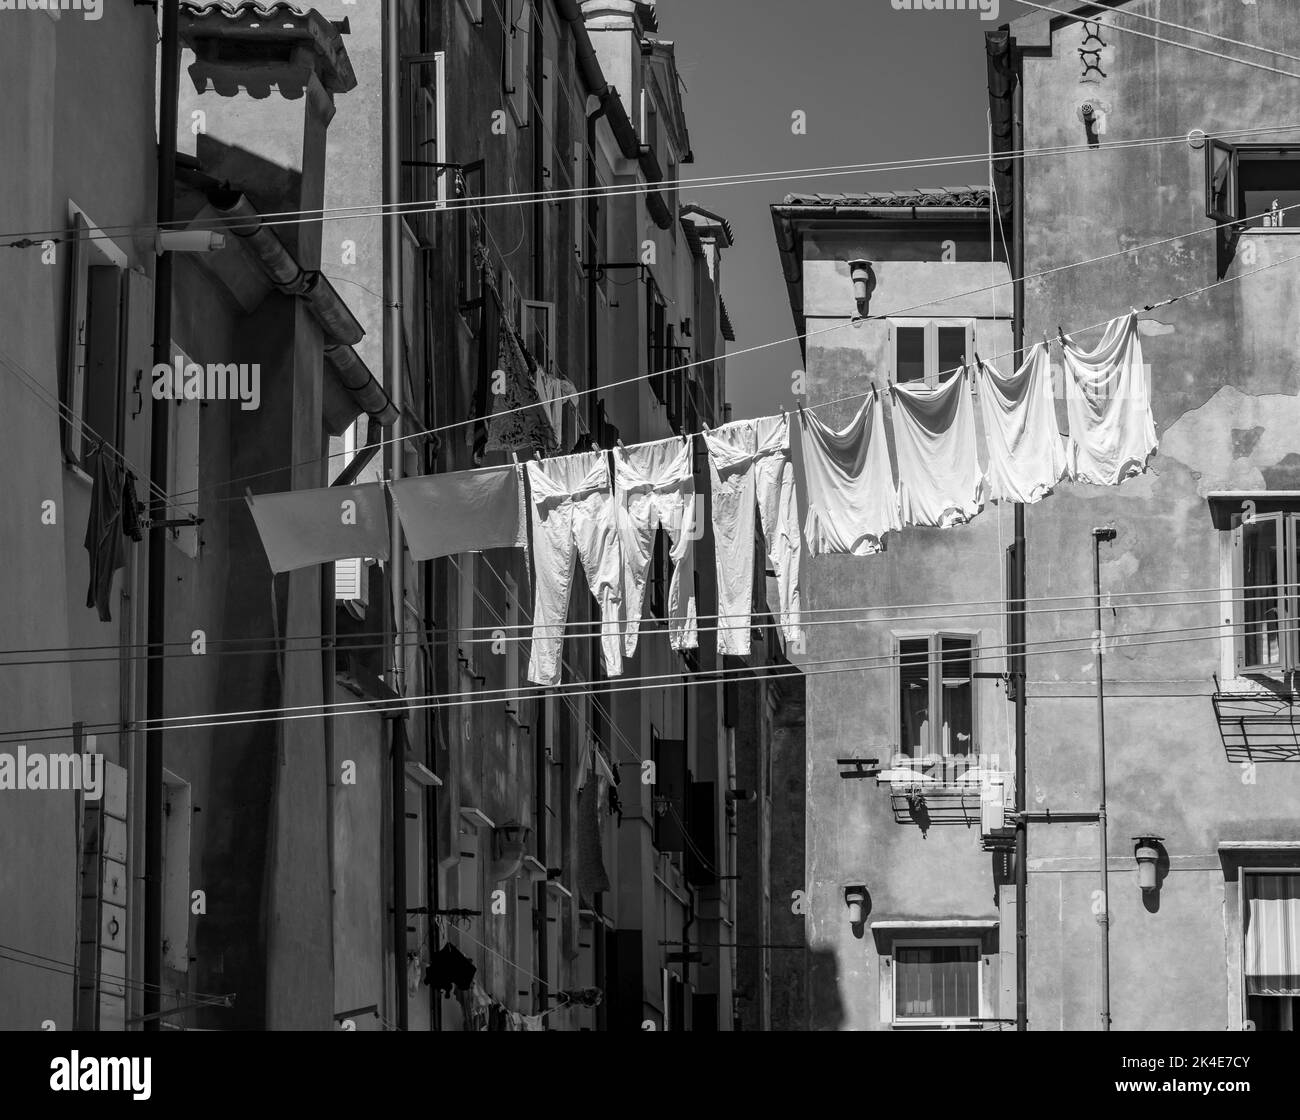 Laundry on a clothesline between houses in Italy black and white Stock Photo